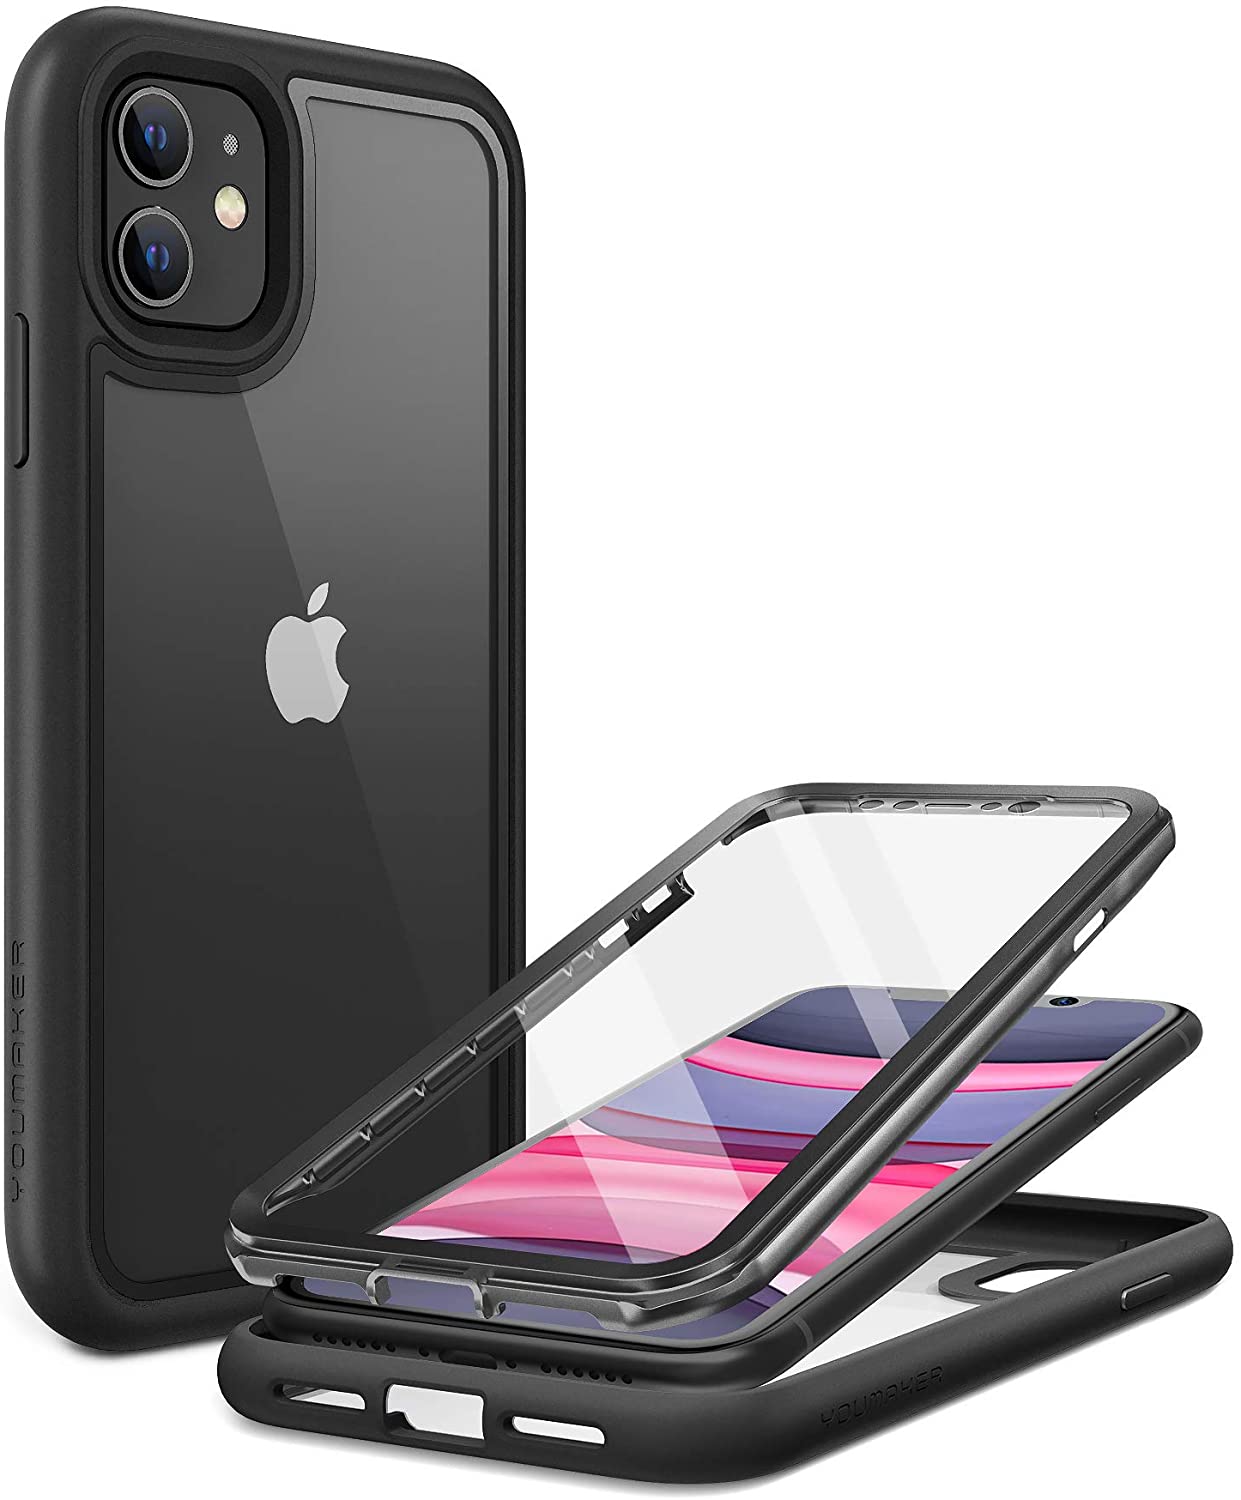 YOUMAKER Design for iPhone 11 Case, Built-in Screen Protector Full Body Rugged Heavy Duty. - e4cents